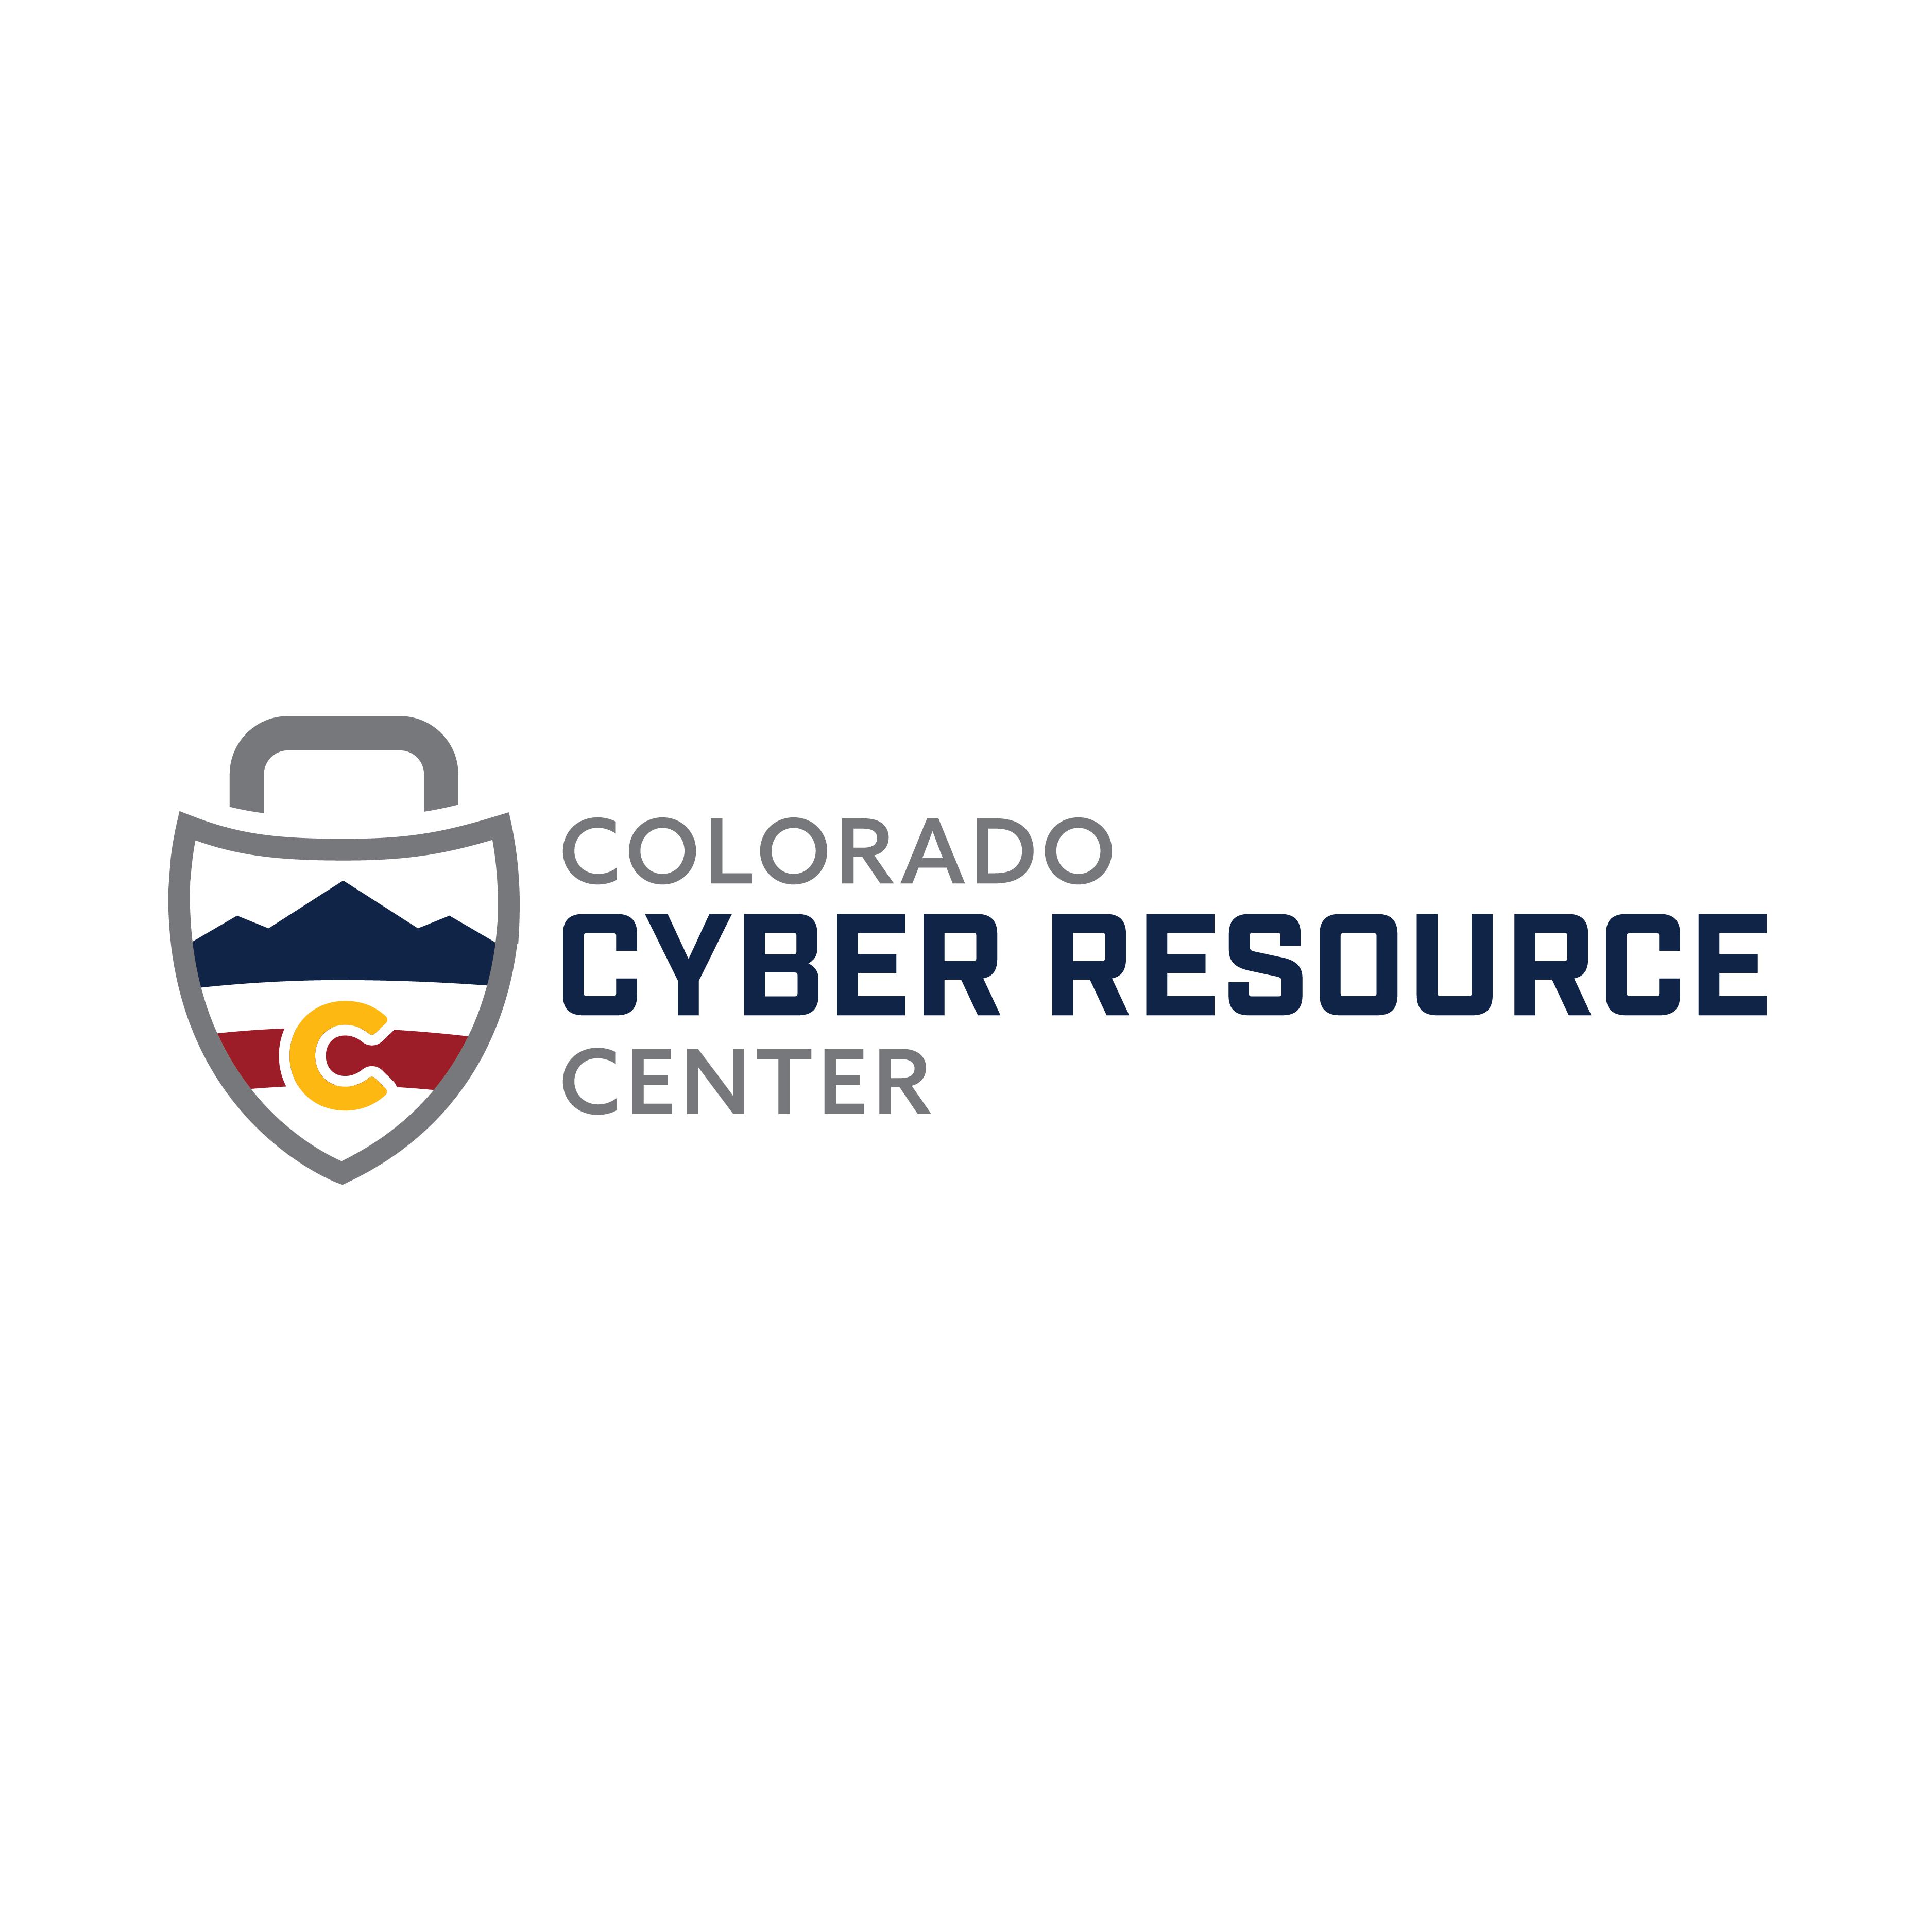 Colorado Cyber Resource Center  logo design by logo designer Neon Pig Creative for your inspiration and for the worlds largest logo competition